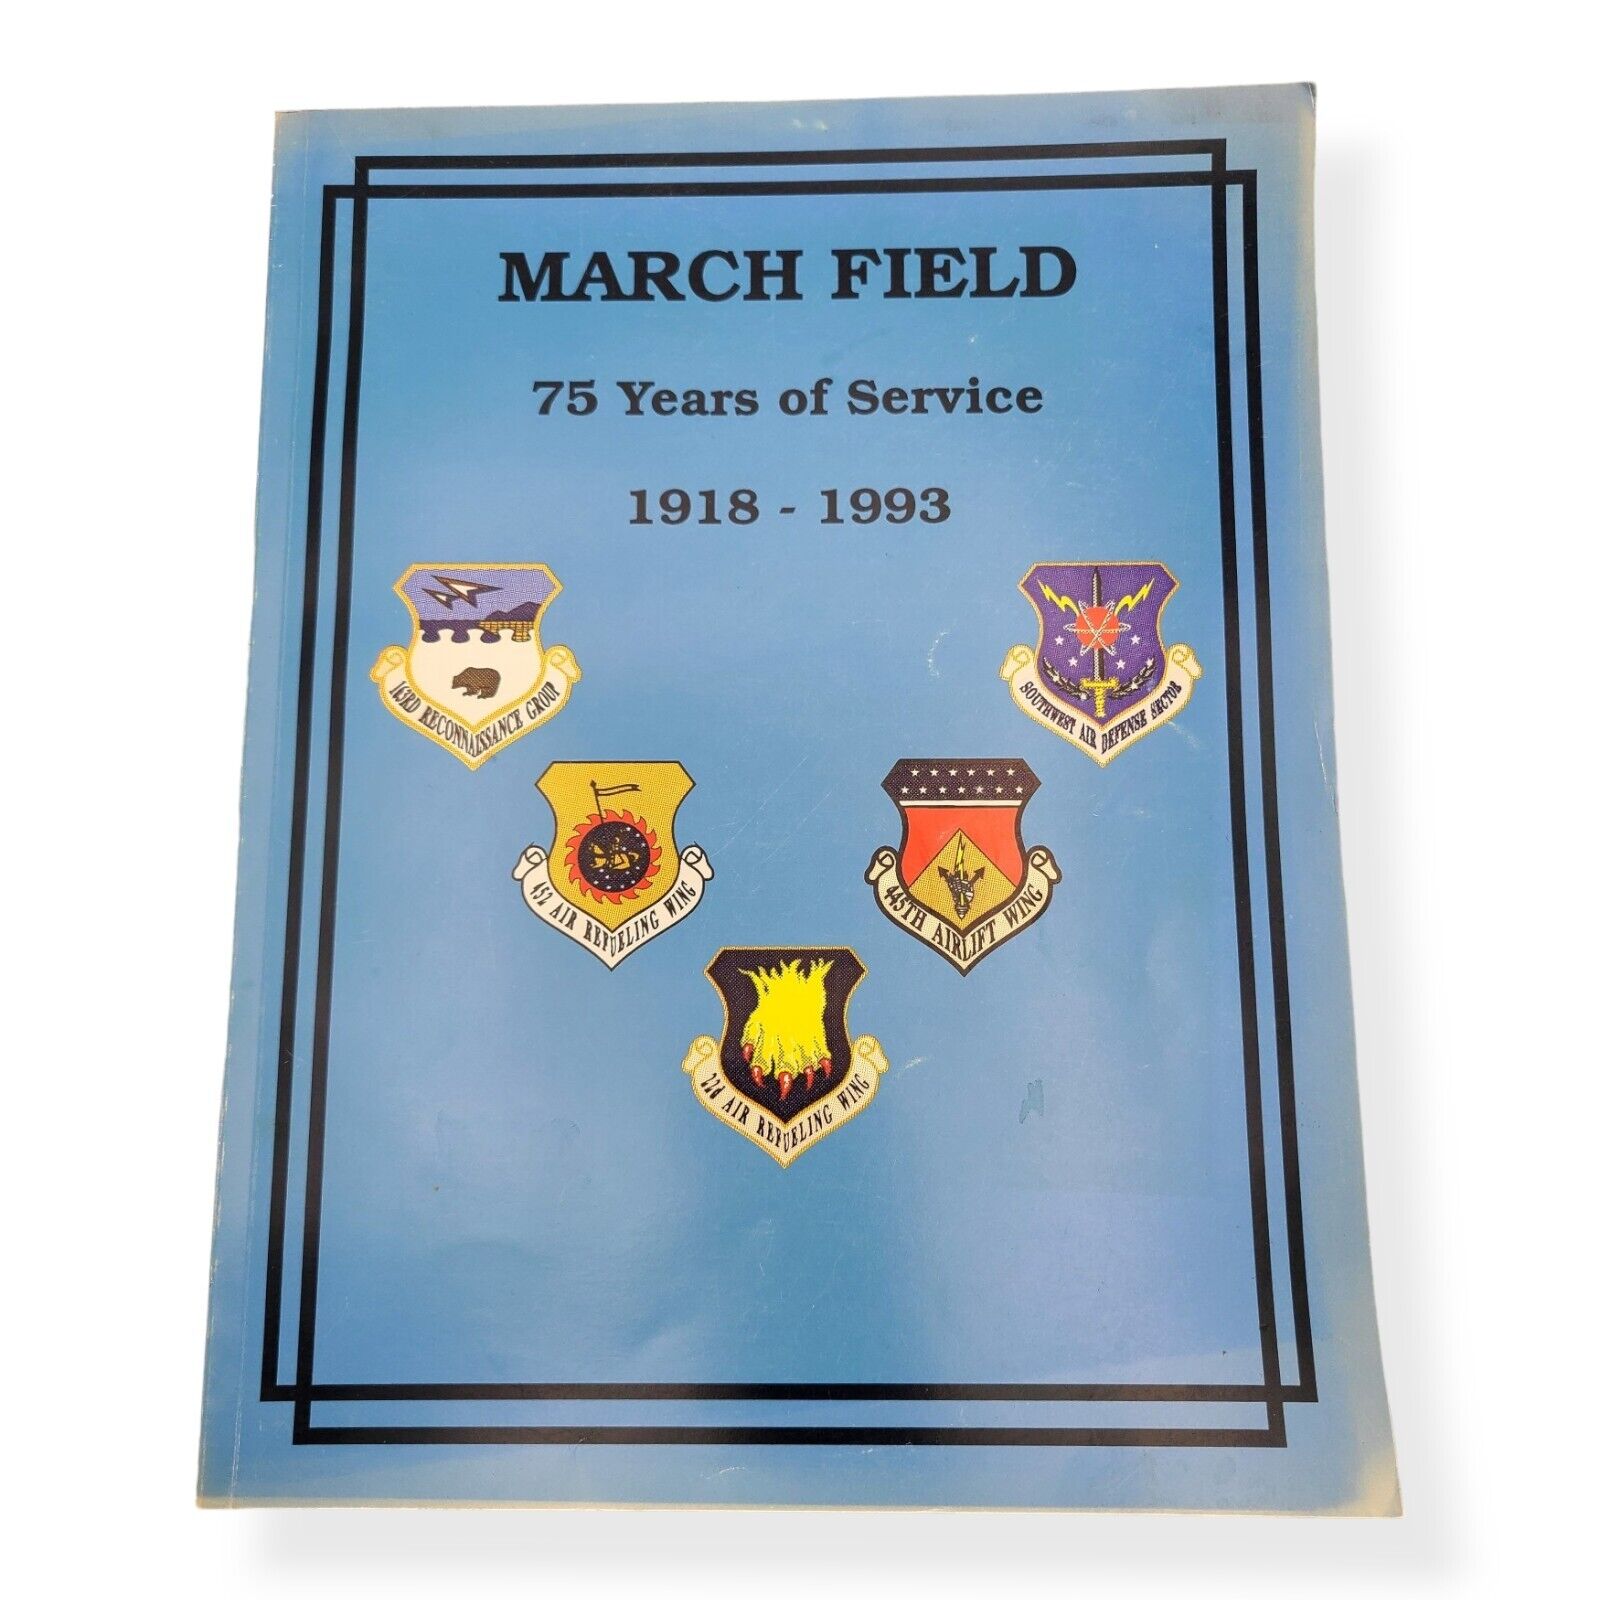 March Field 75 Years of Service 1918-1993 Air Force Base Aviation History Book